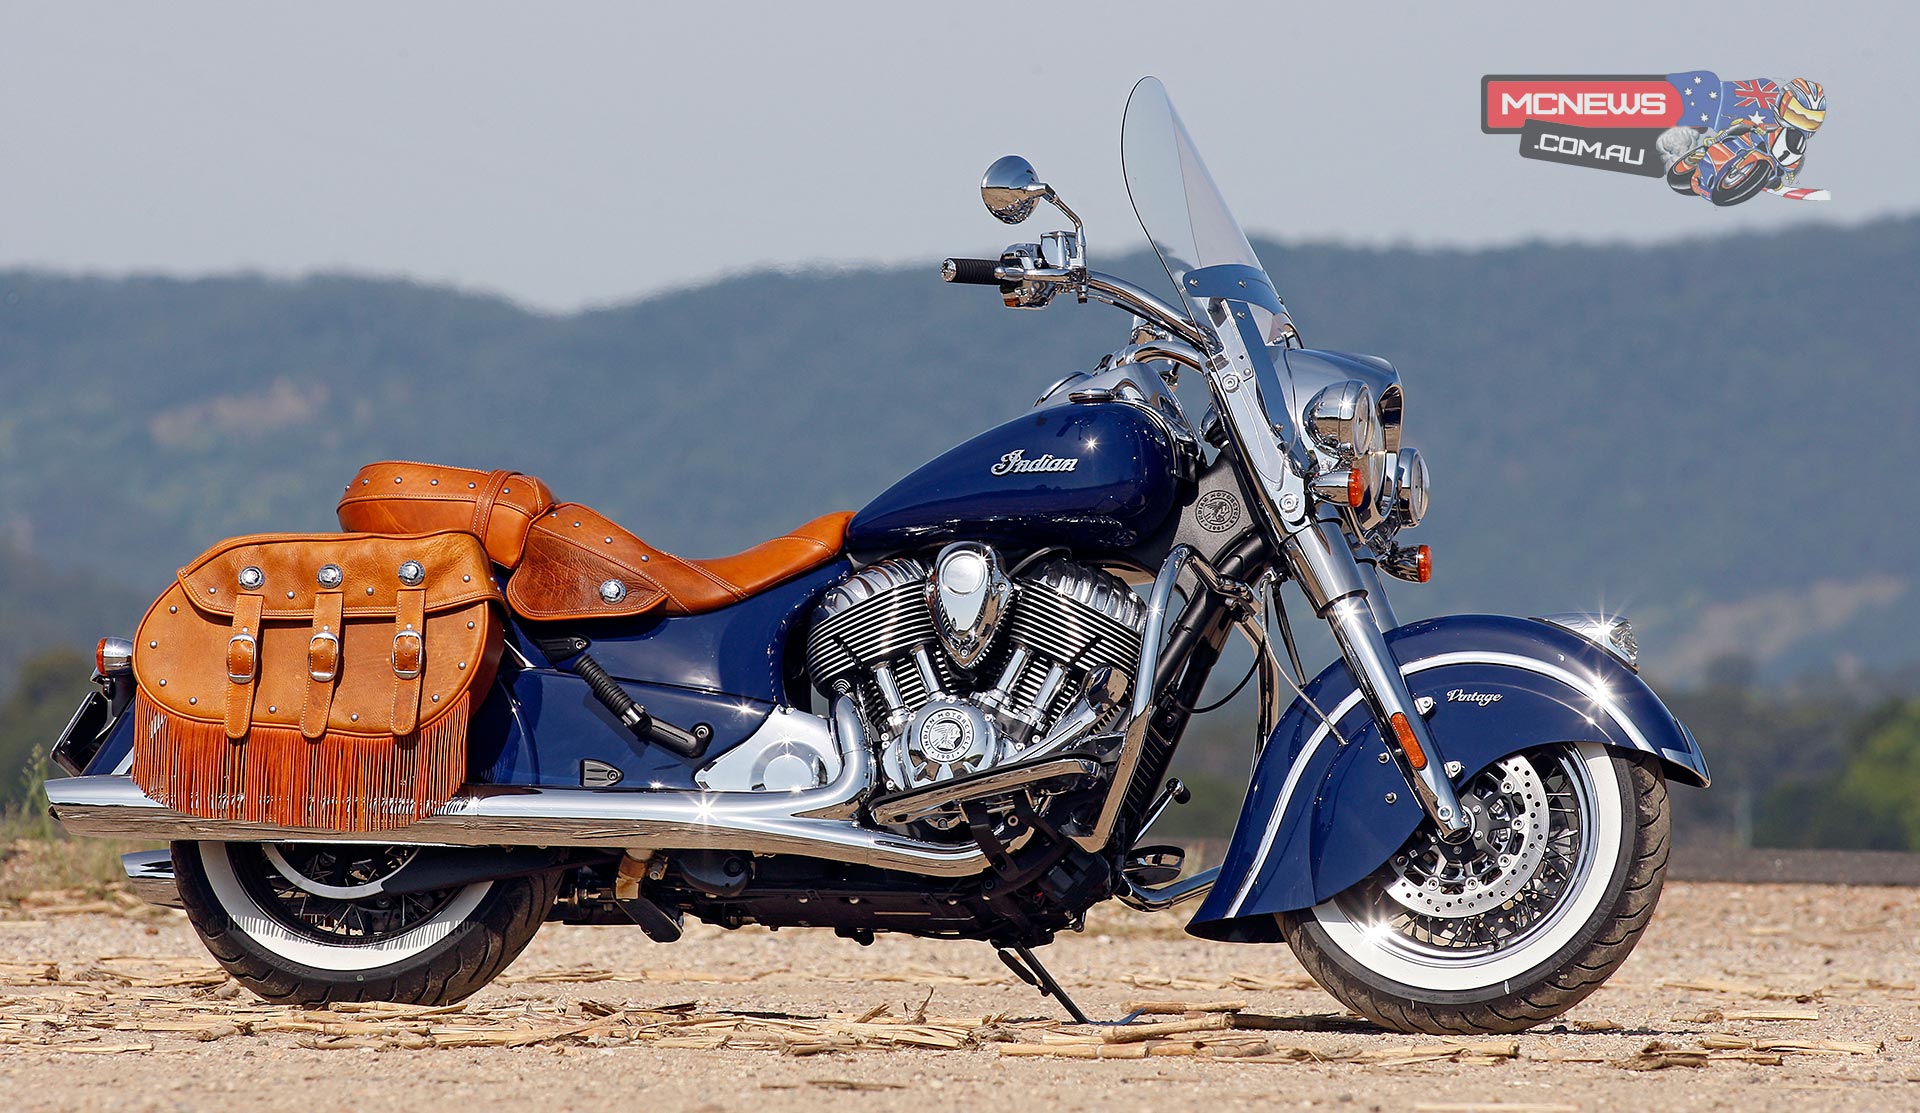 Index of /wp-content/gallery/indian-motorcycles-2014.